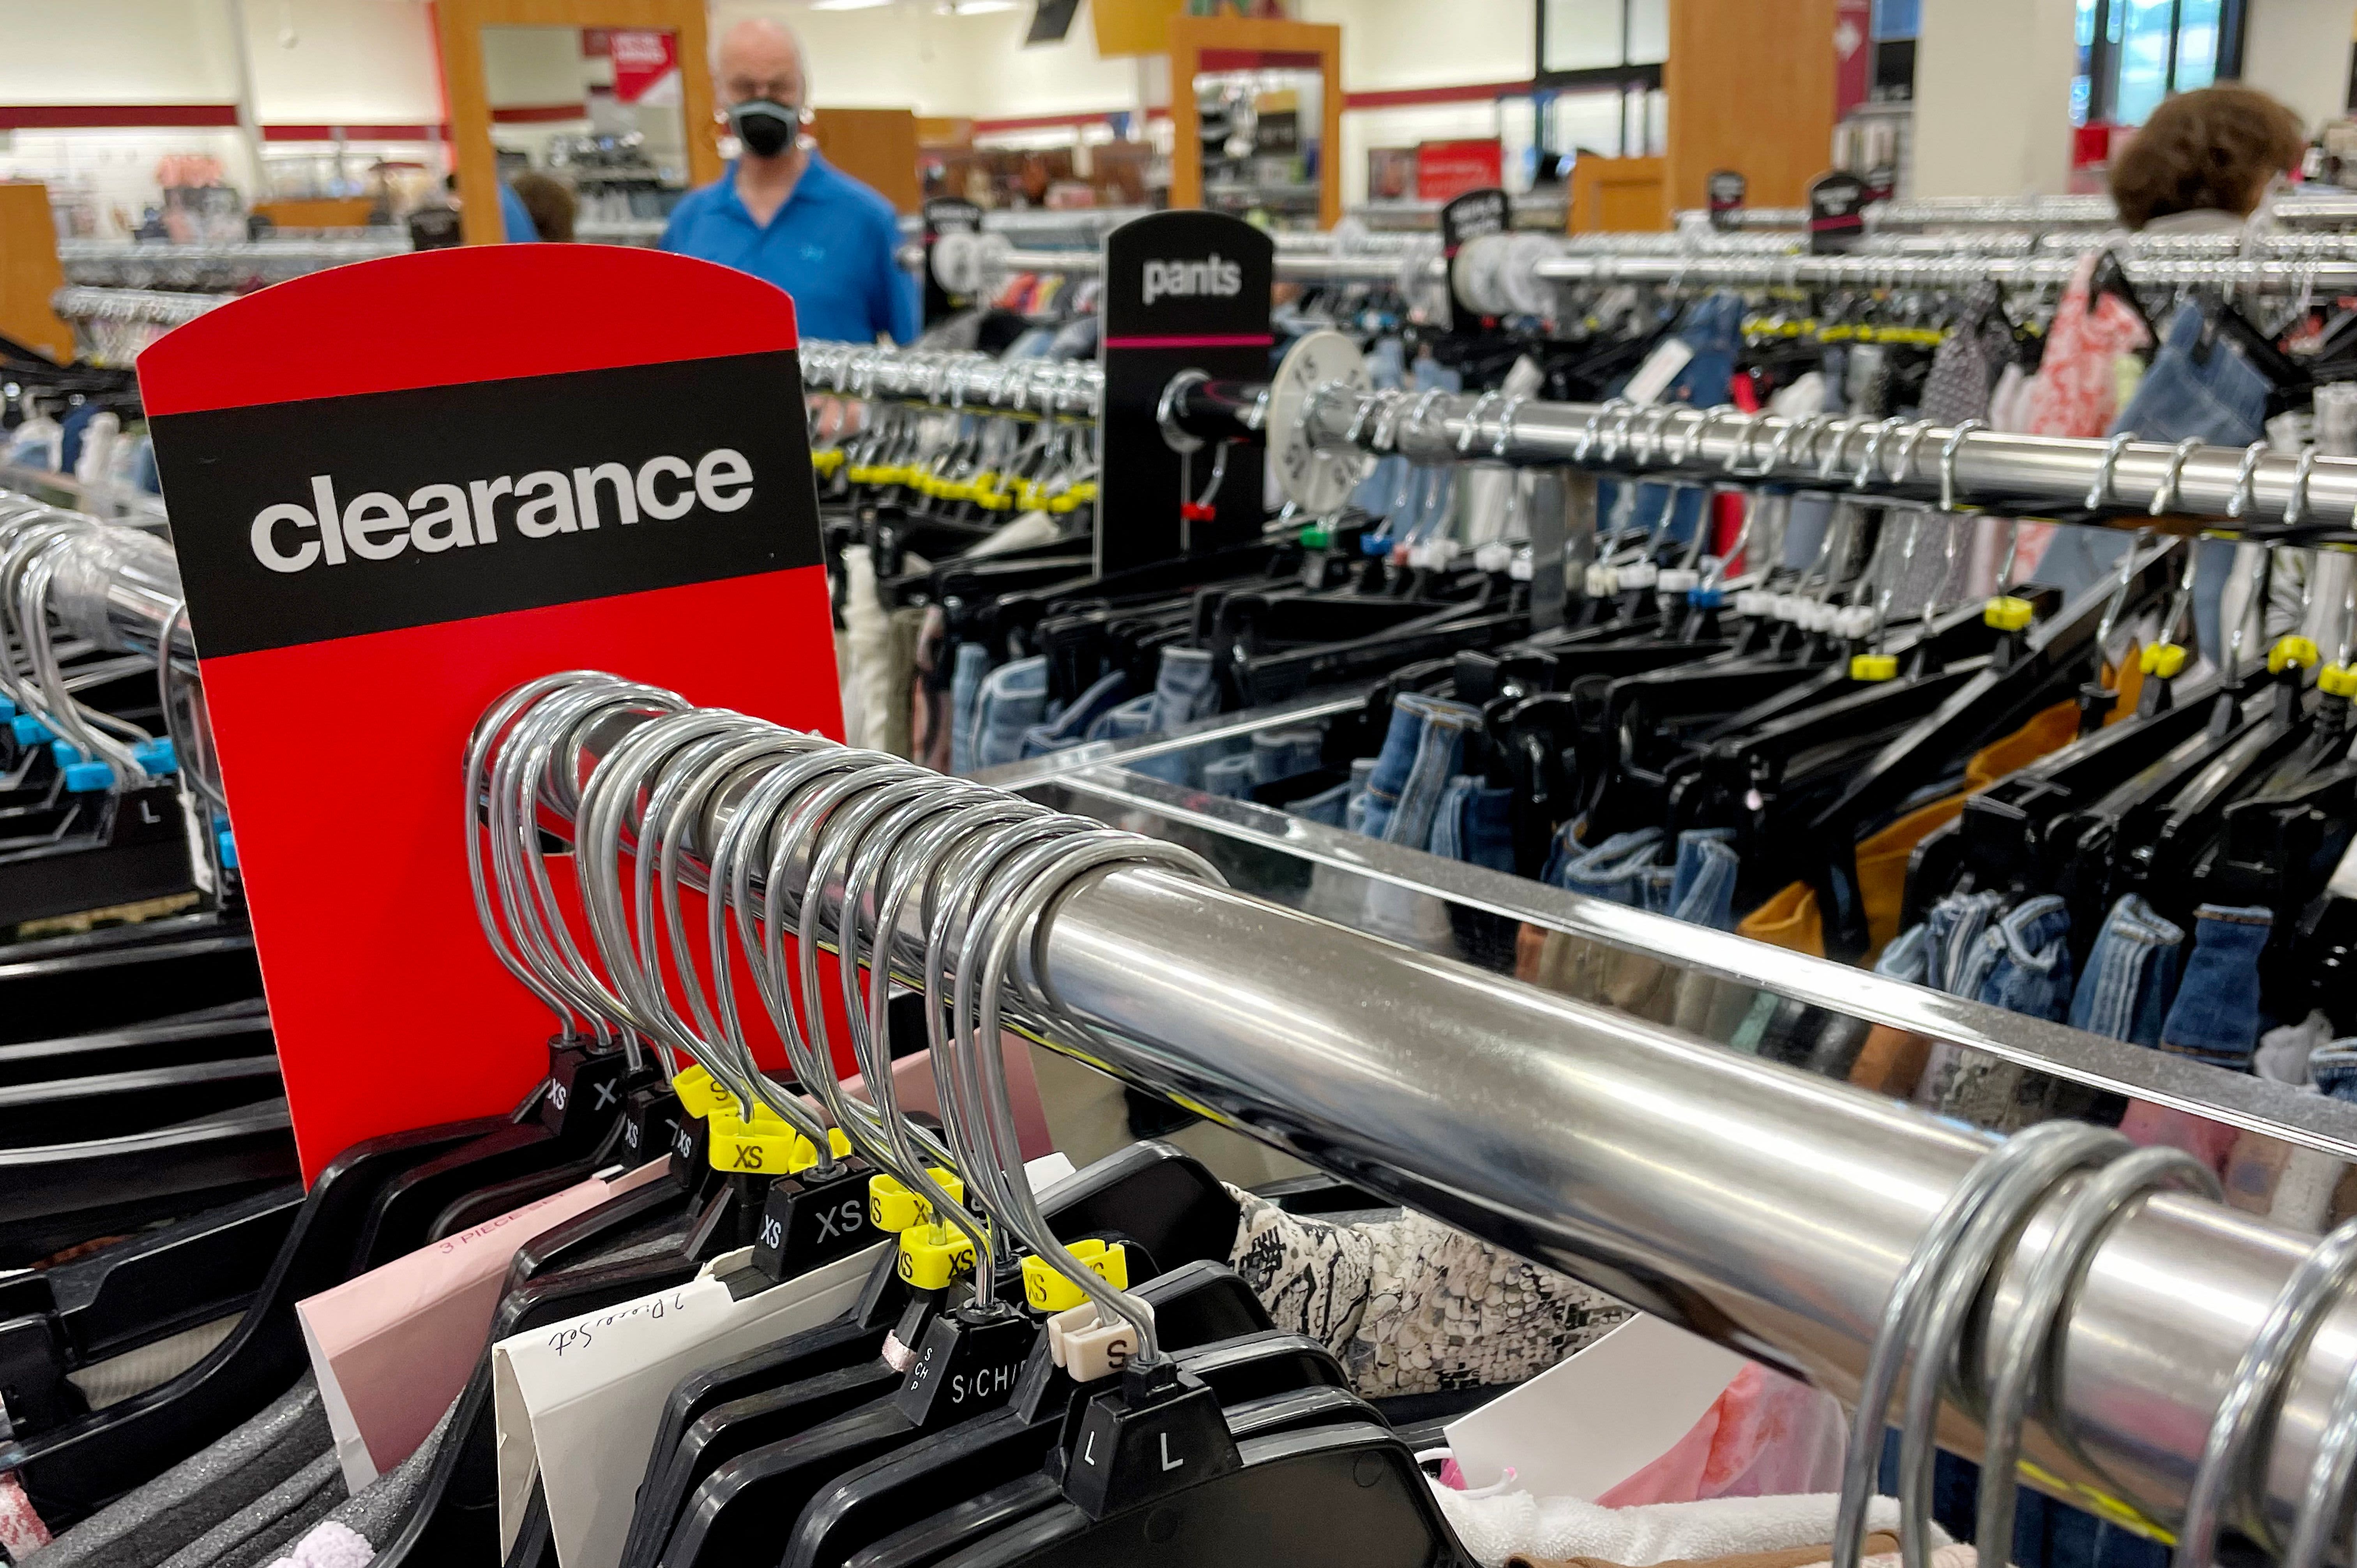 We're buying more shares of this retailer as stocks point to an ugly open